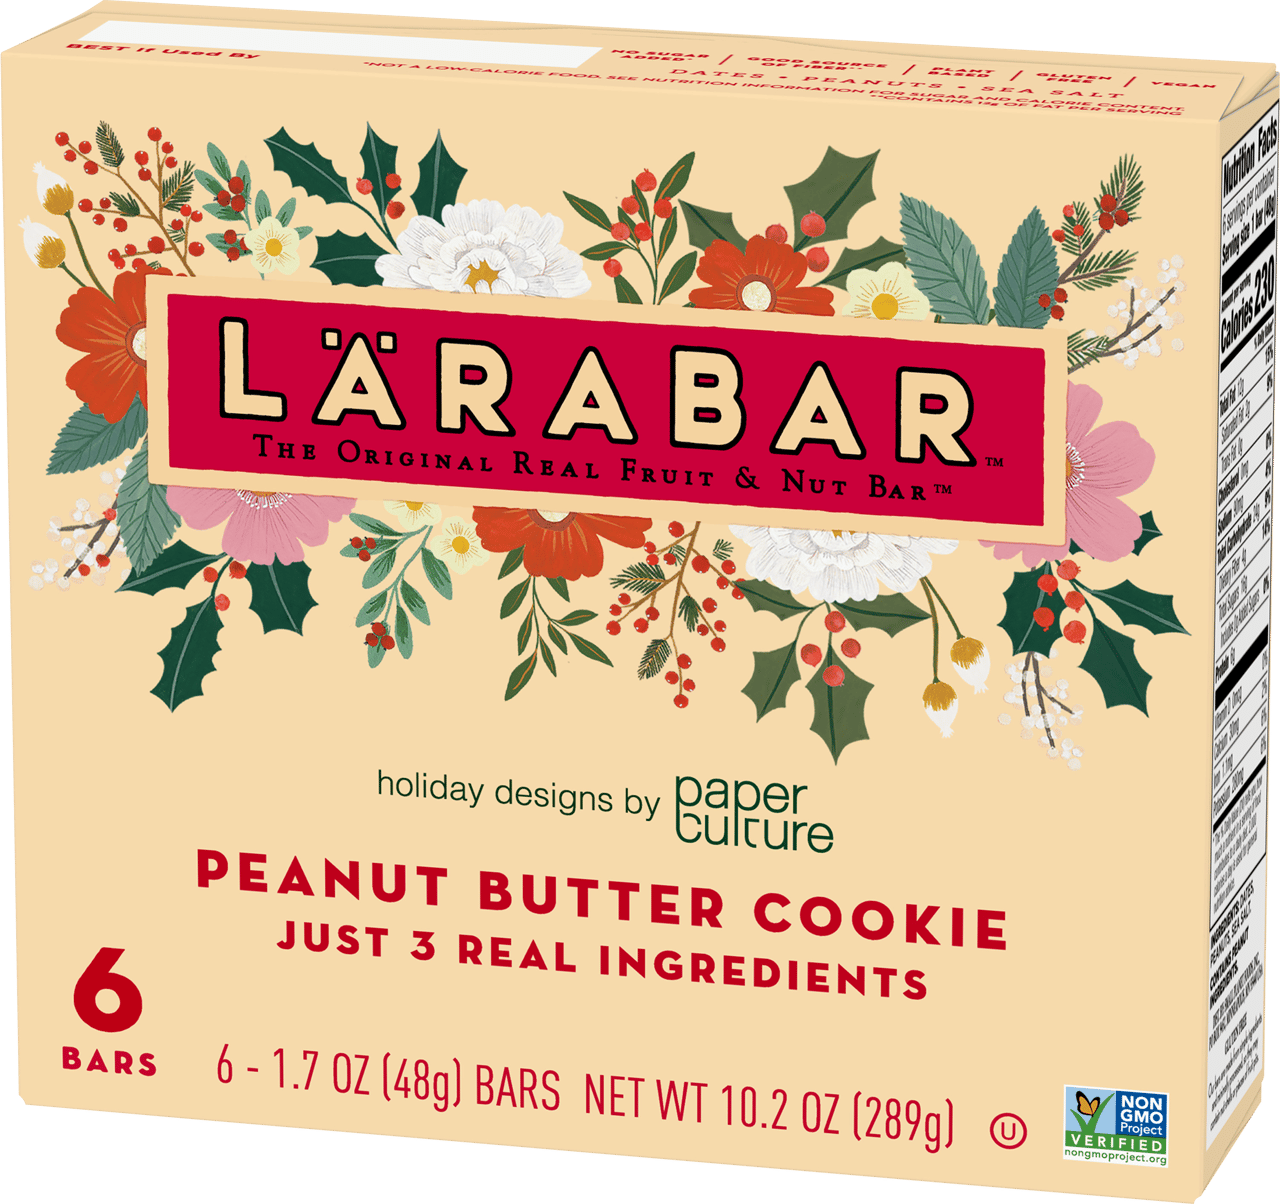 Paper Culture designs featured on limited-edition Lrabar packaging.